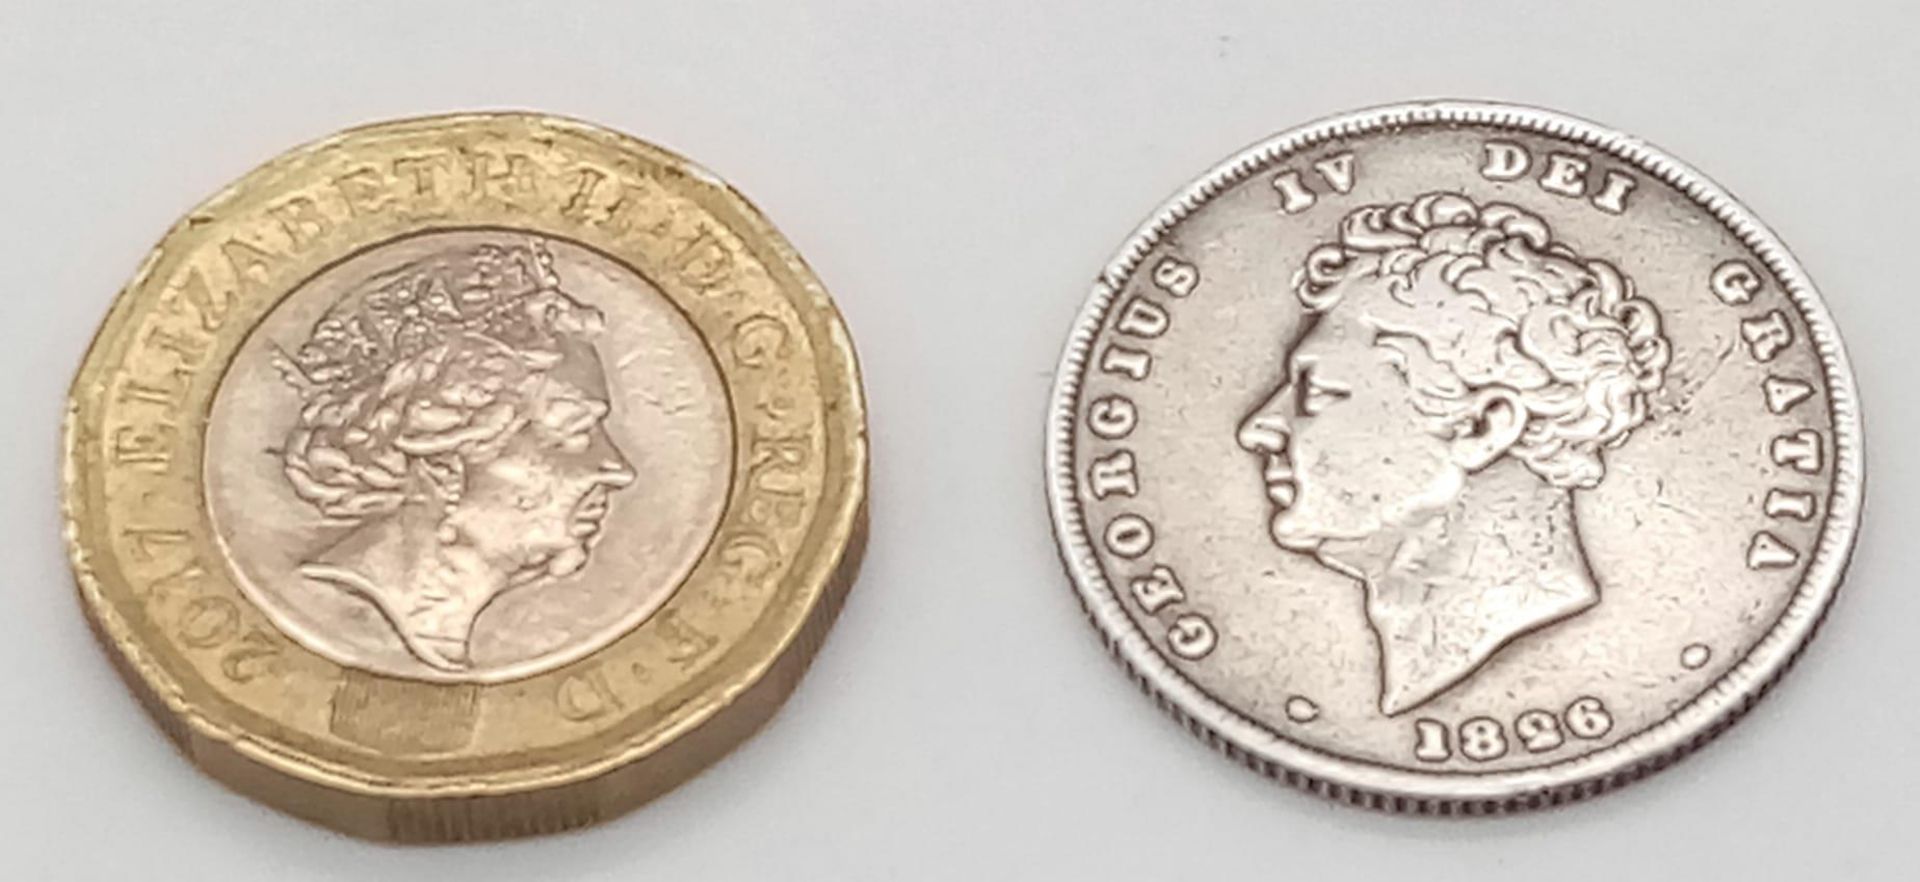 An 1816 George III British Silver Sixpence Coin. A decent grade but please see photos. - Image 9 of 10